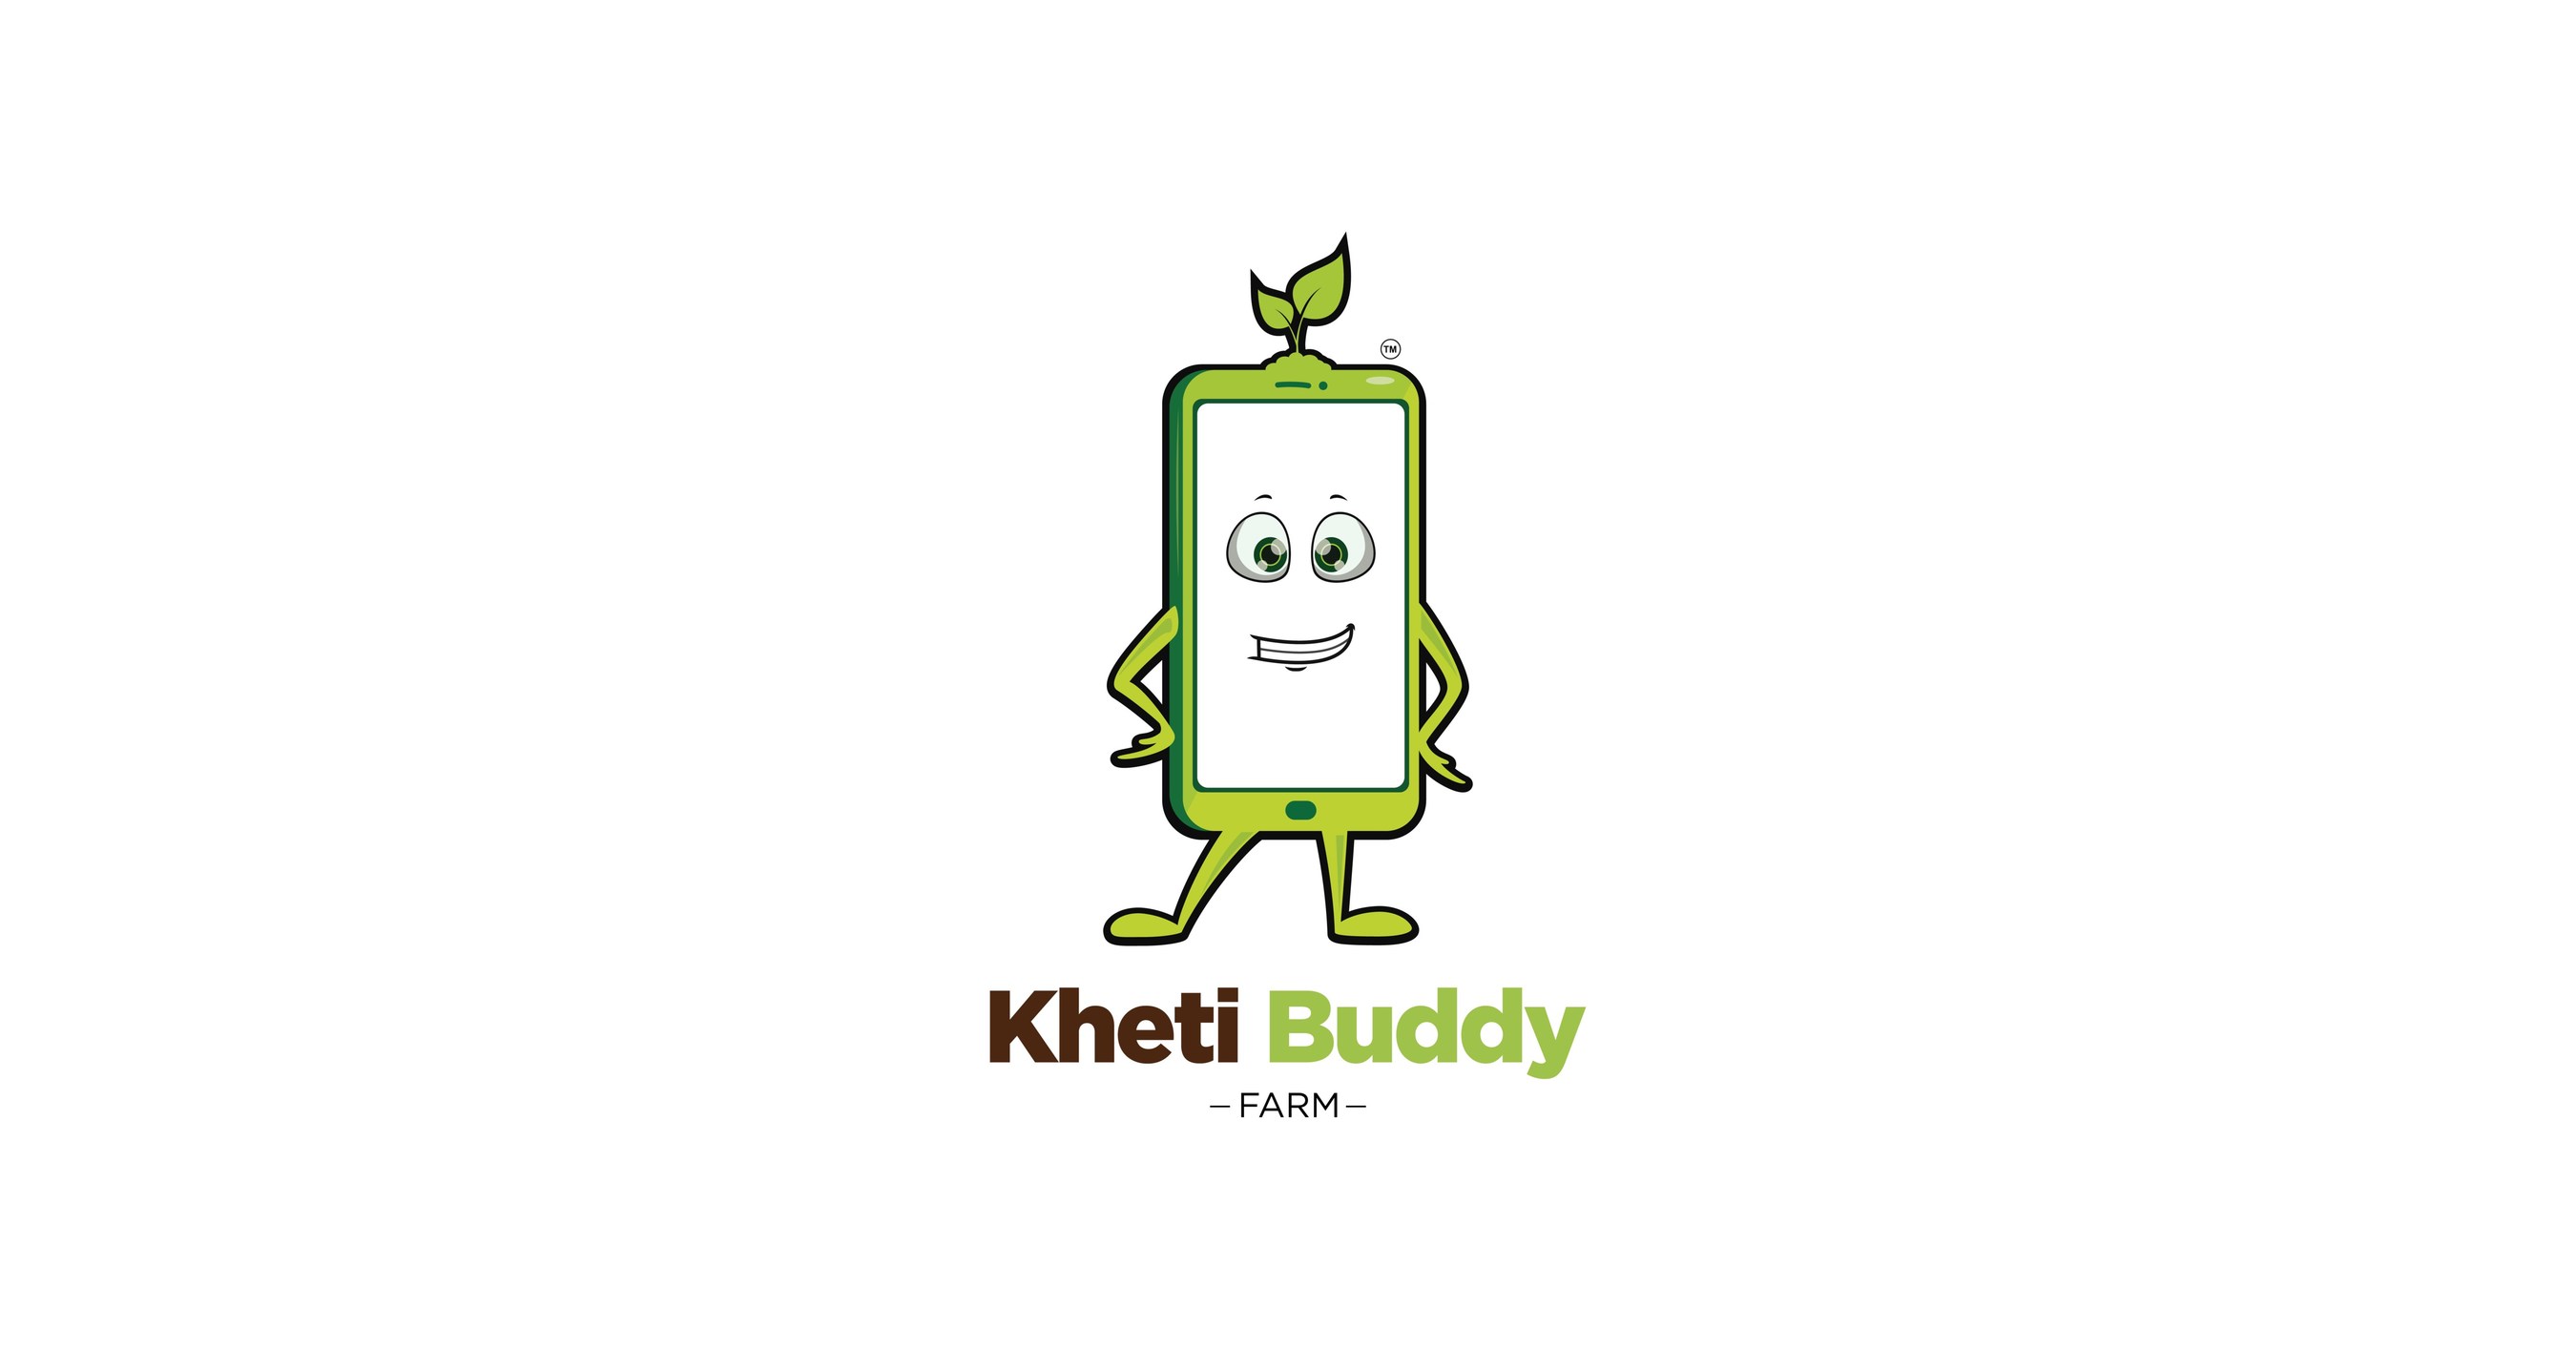 Khetibuddy goes prime on the home gardening experience with launch of its premium subscription and training courses